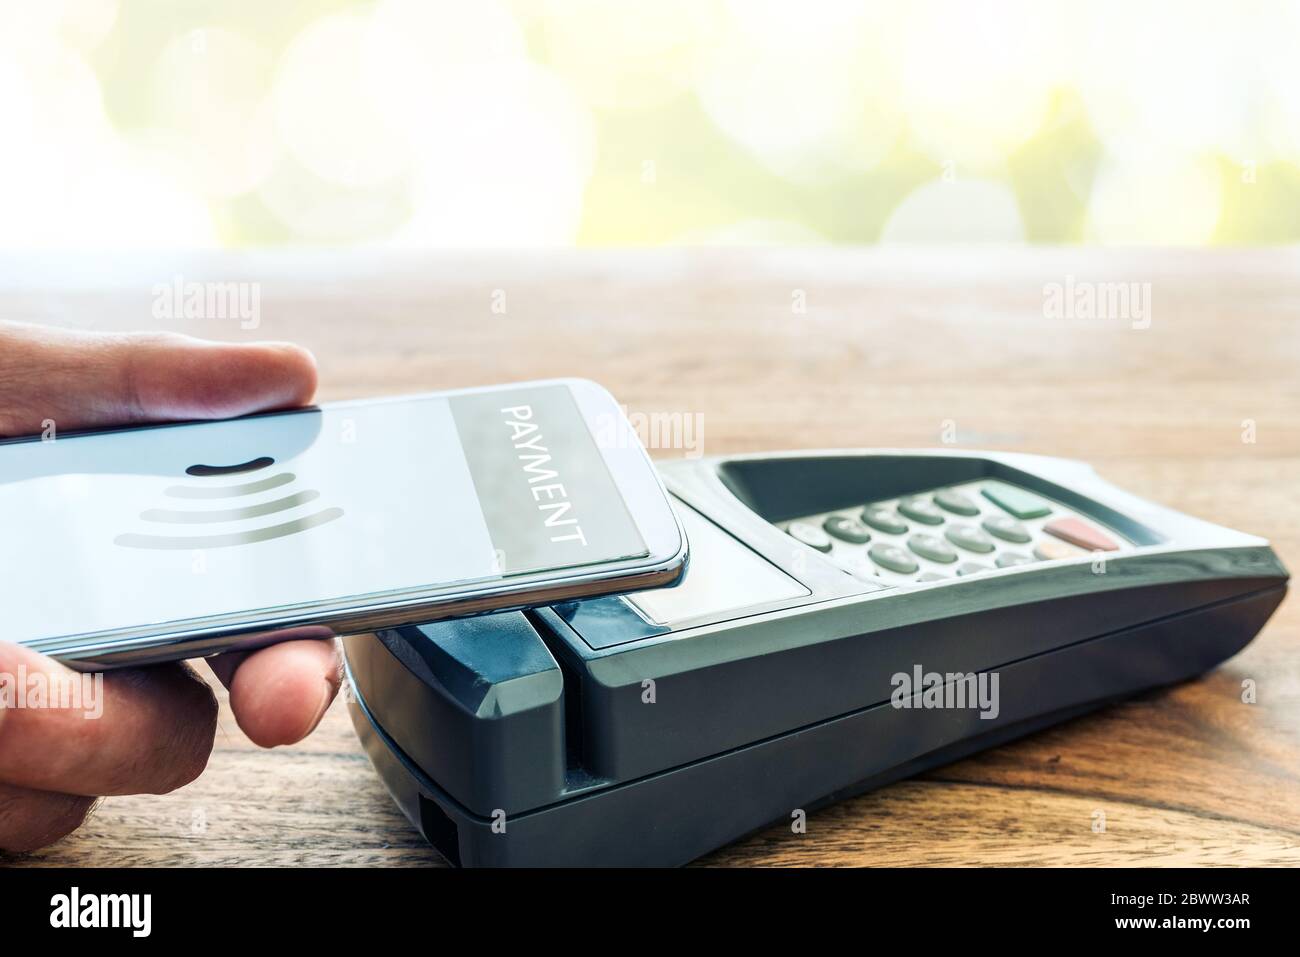 contactless payment using smartphone concept, person holding phone against POS payment terminal Stock Photo